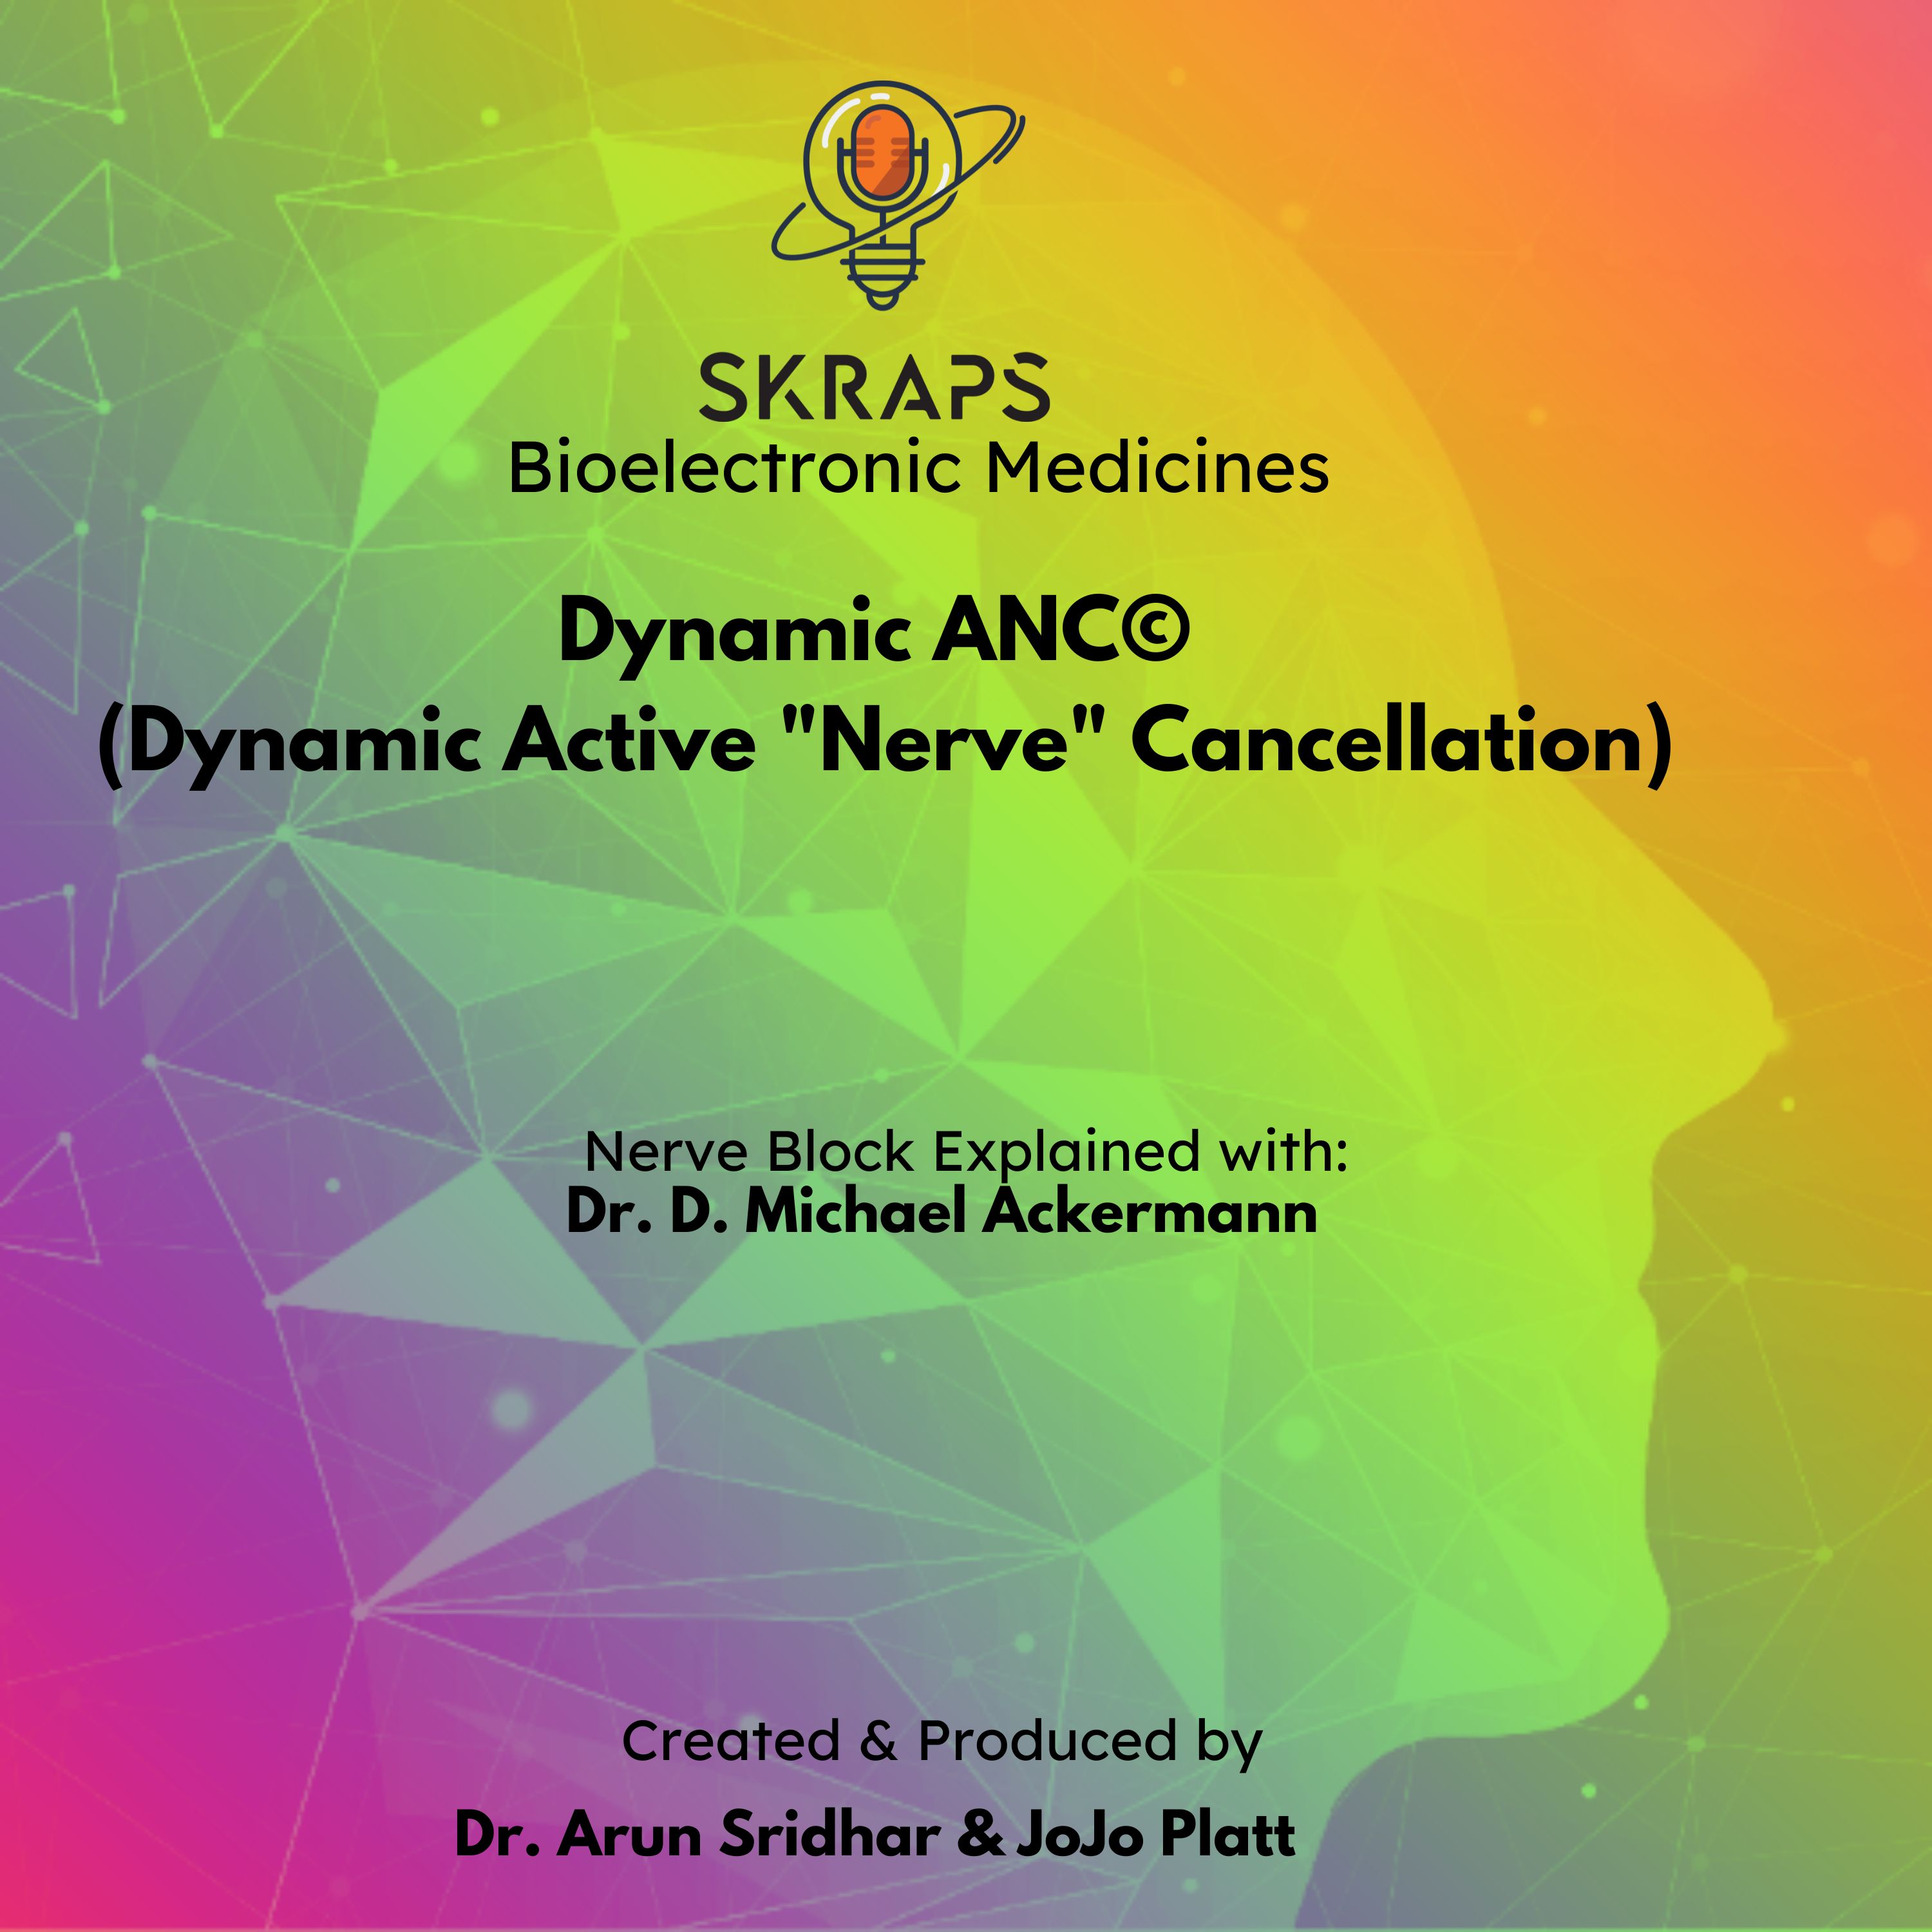 It's time for DANC - “Dynamic ANC (Active 